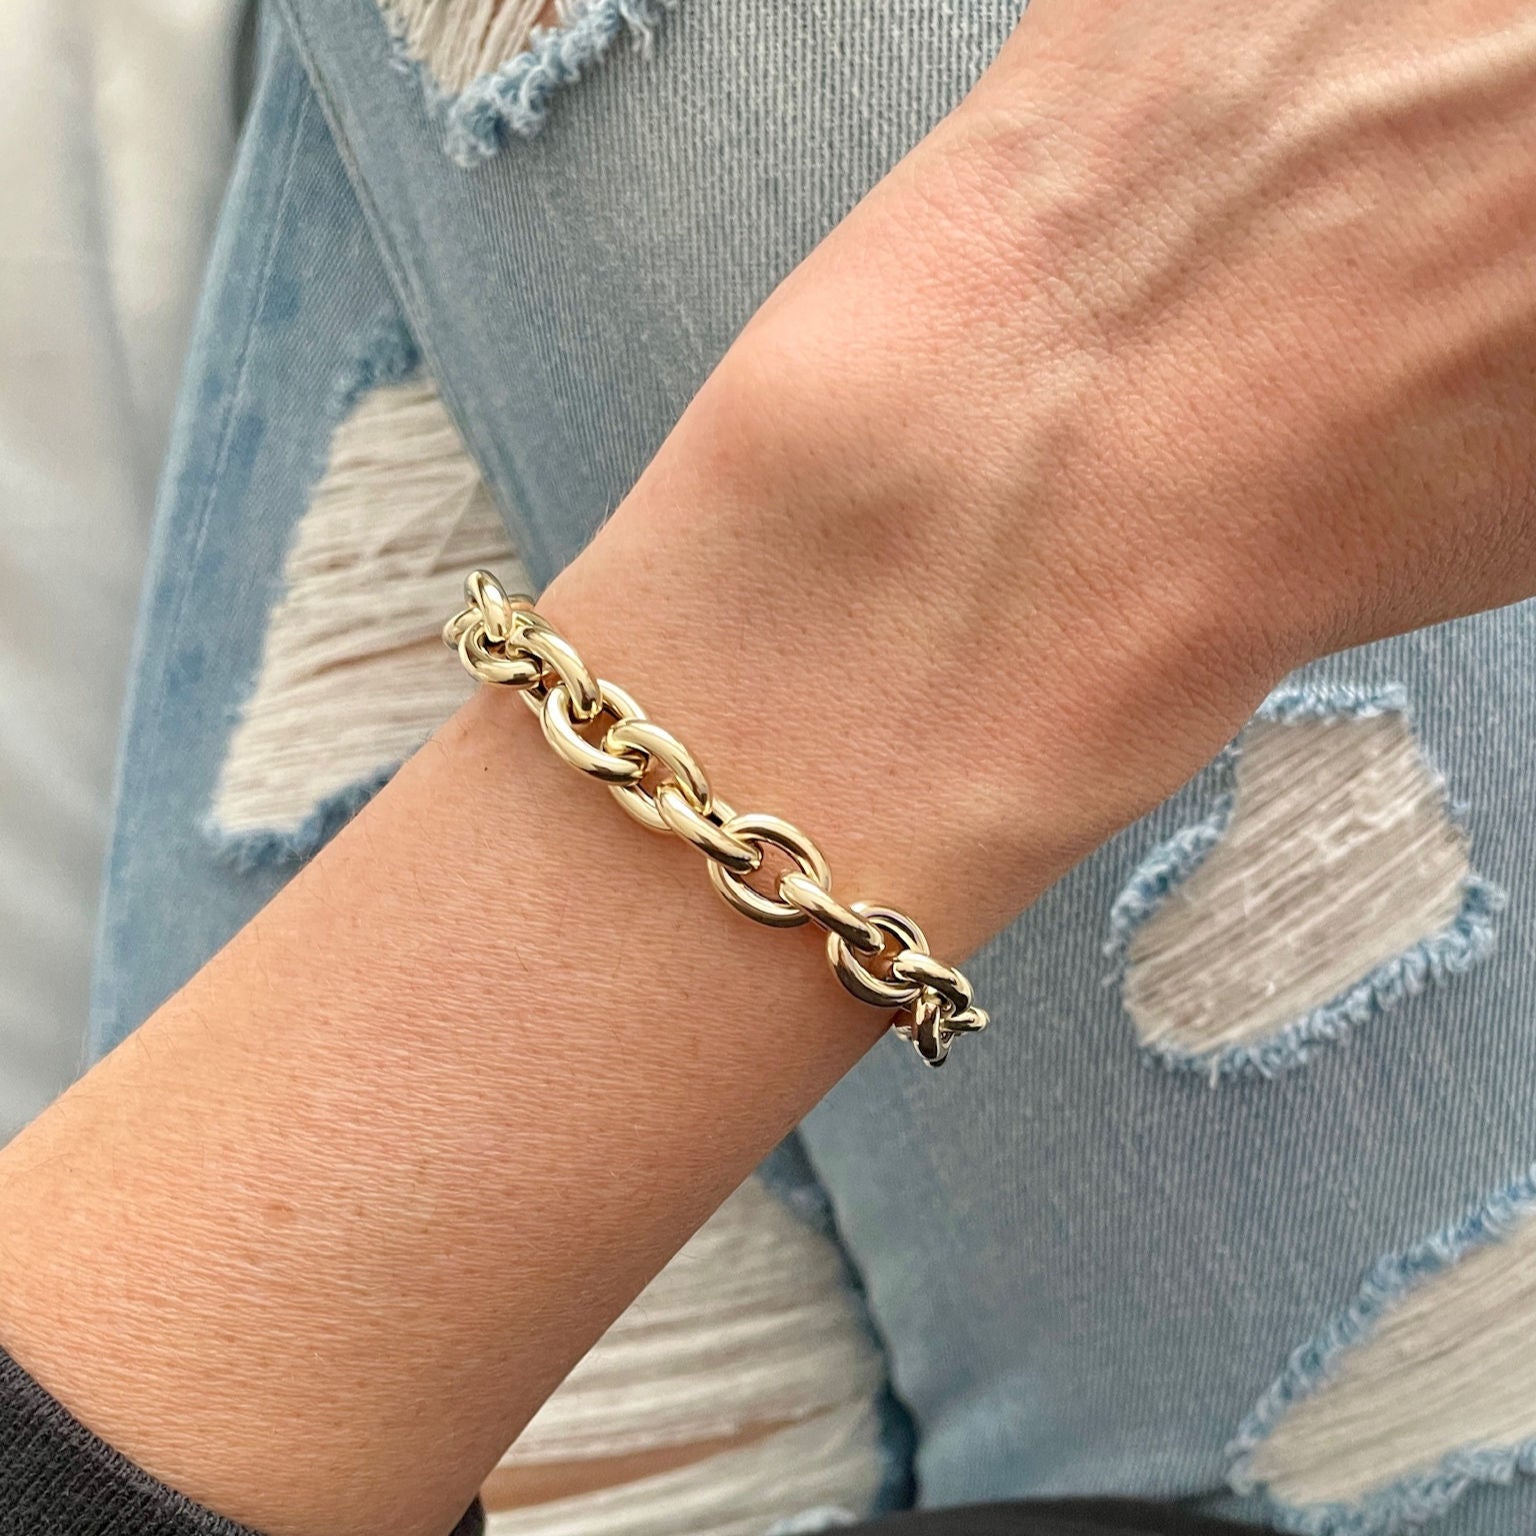 14K YELLOW GOLD THICK ROLO LINK BRACELET